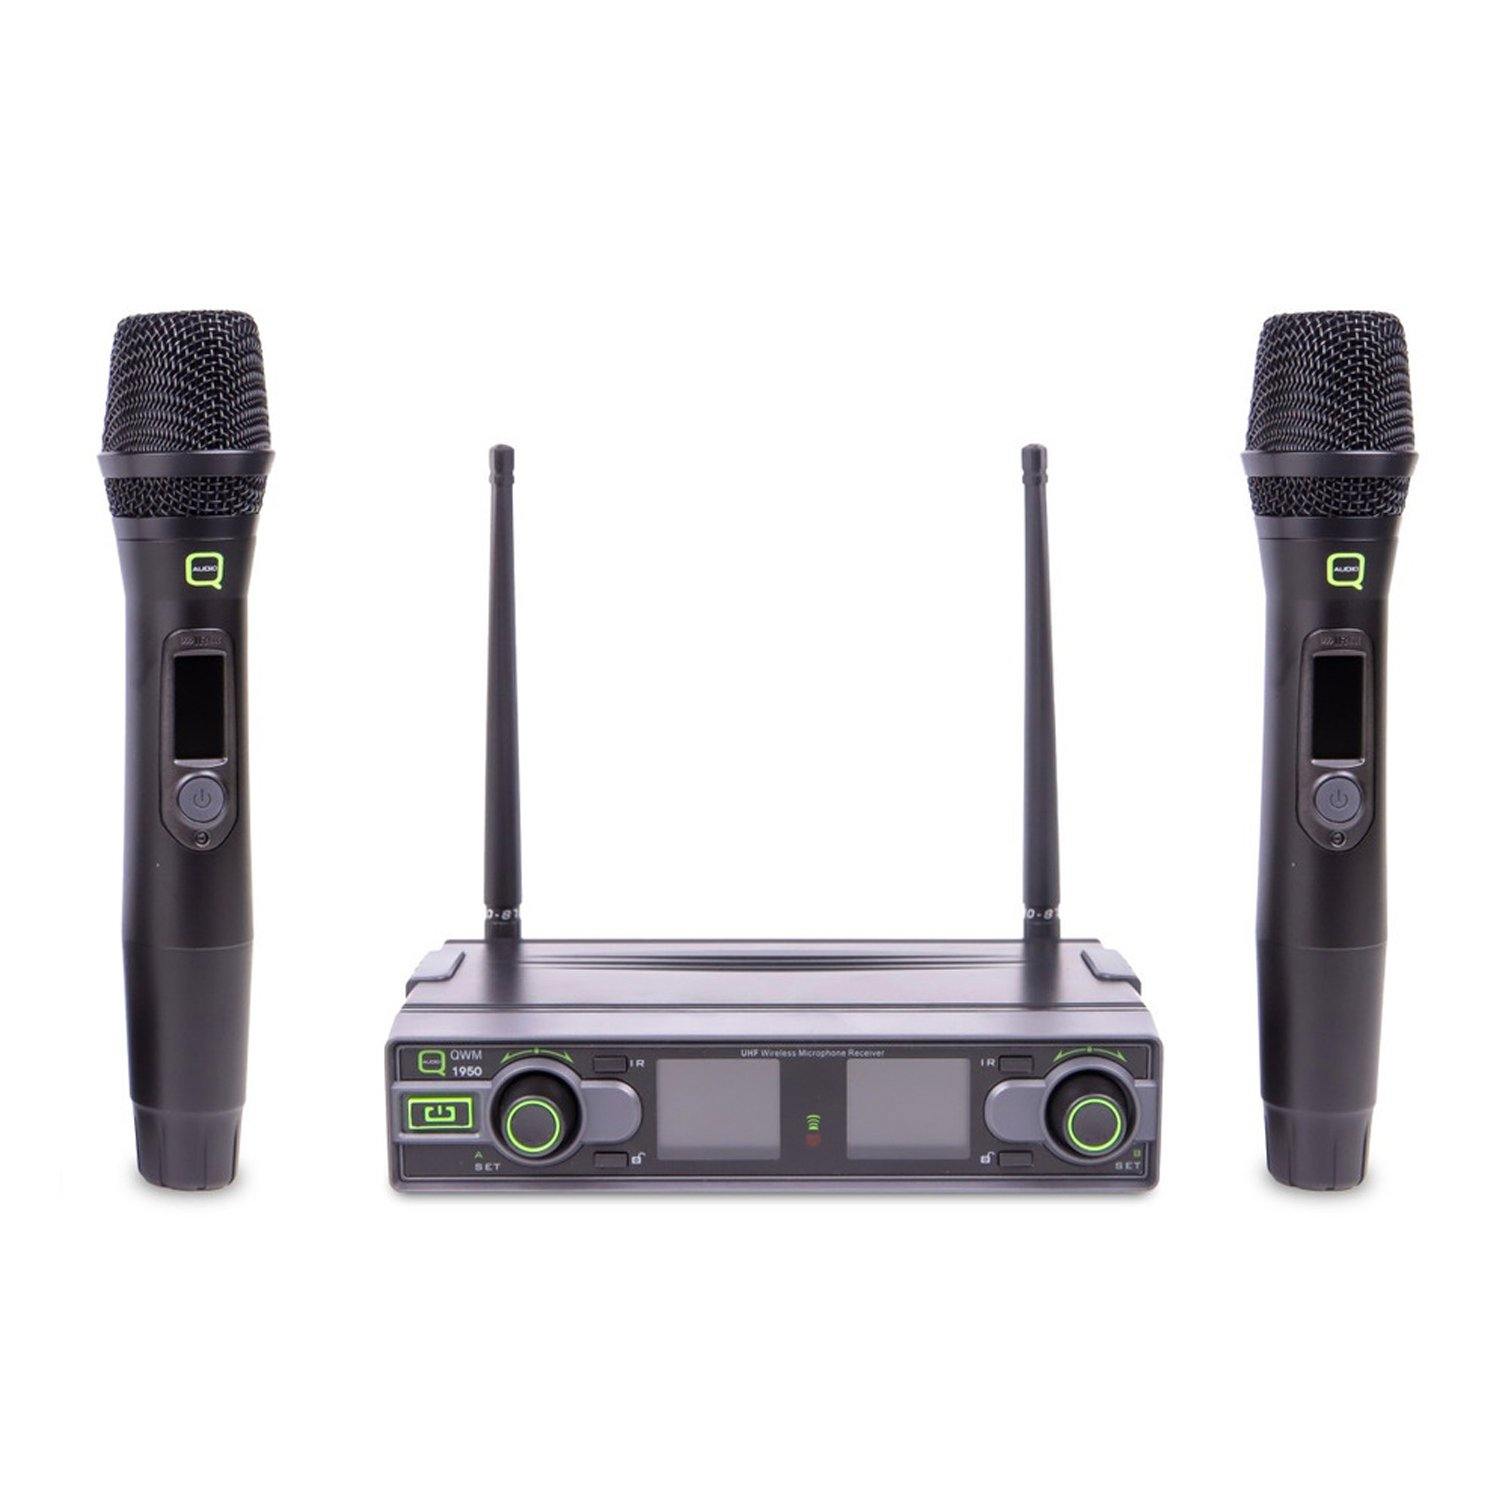 Q-Audio QWM1950 Twin Handheld UHF Wireless Microphone Channel 38 (606.5-613.5 MHz) - DY Pro Audio